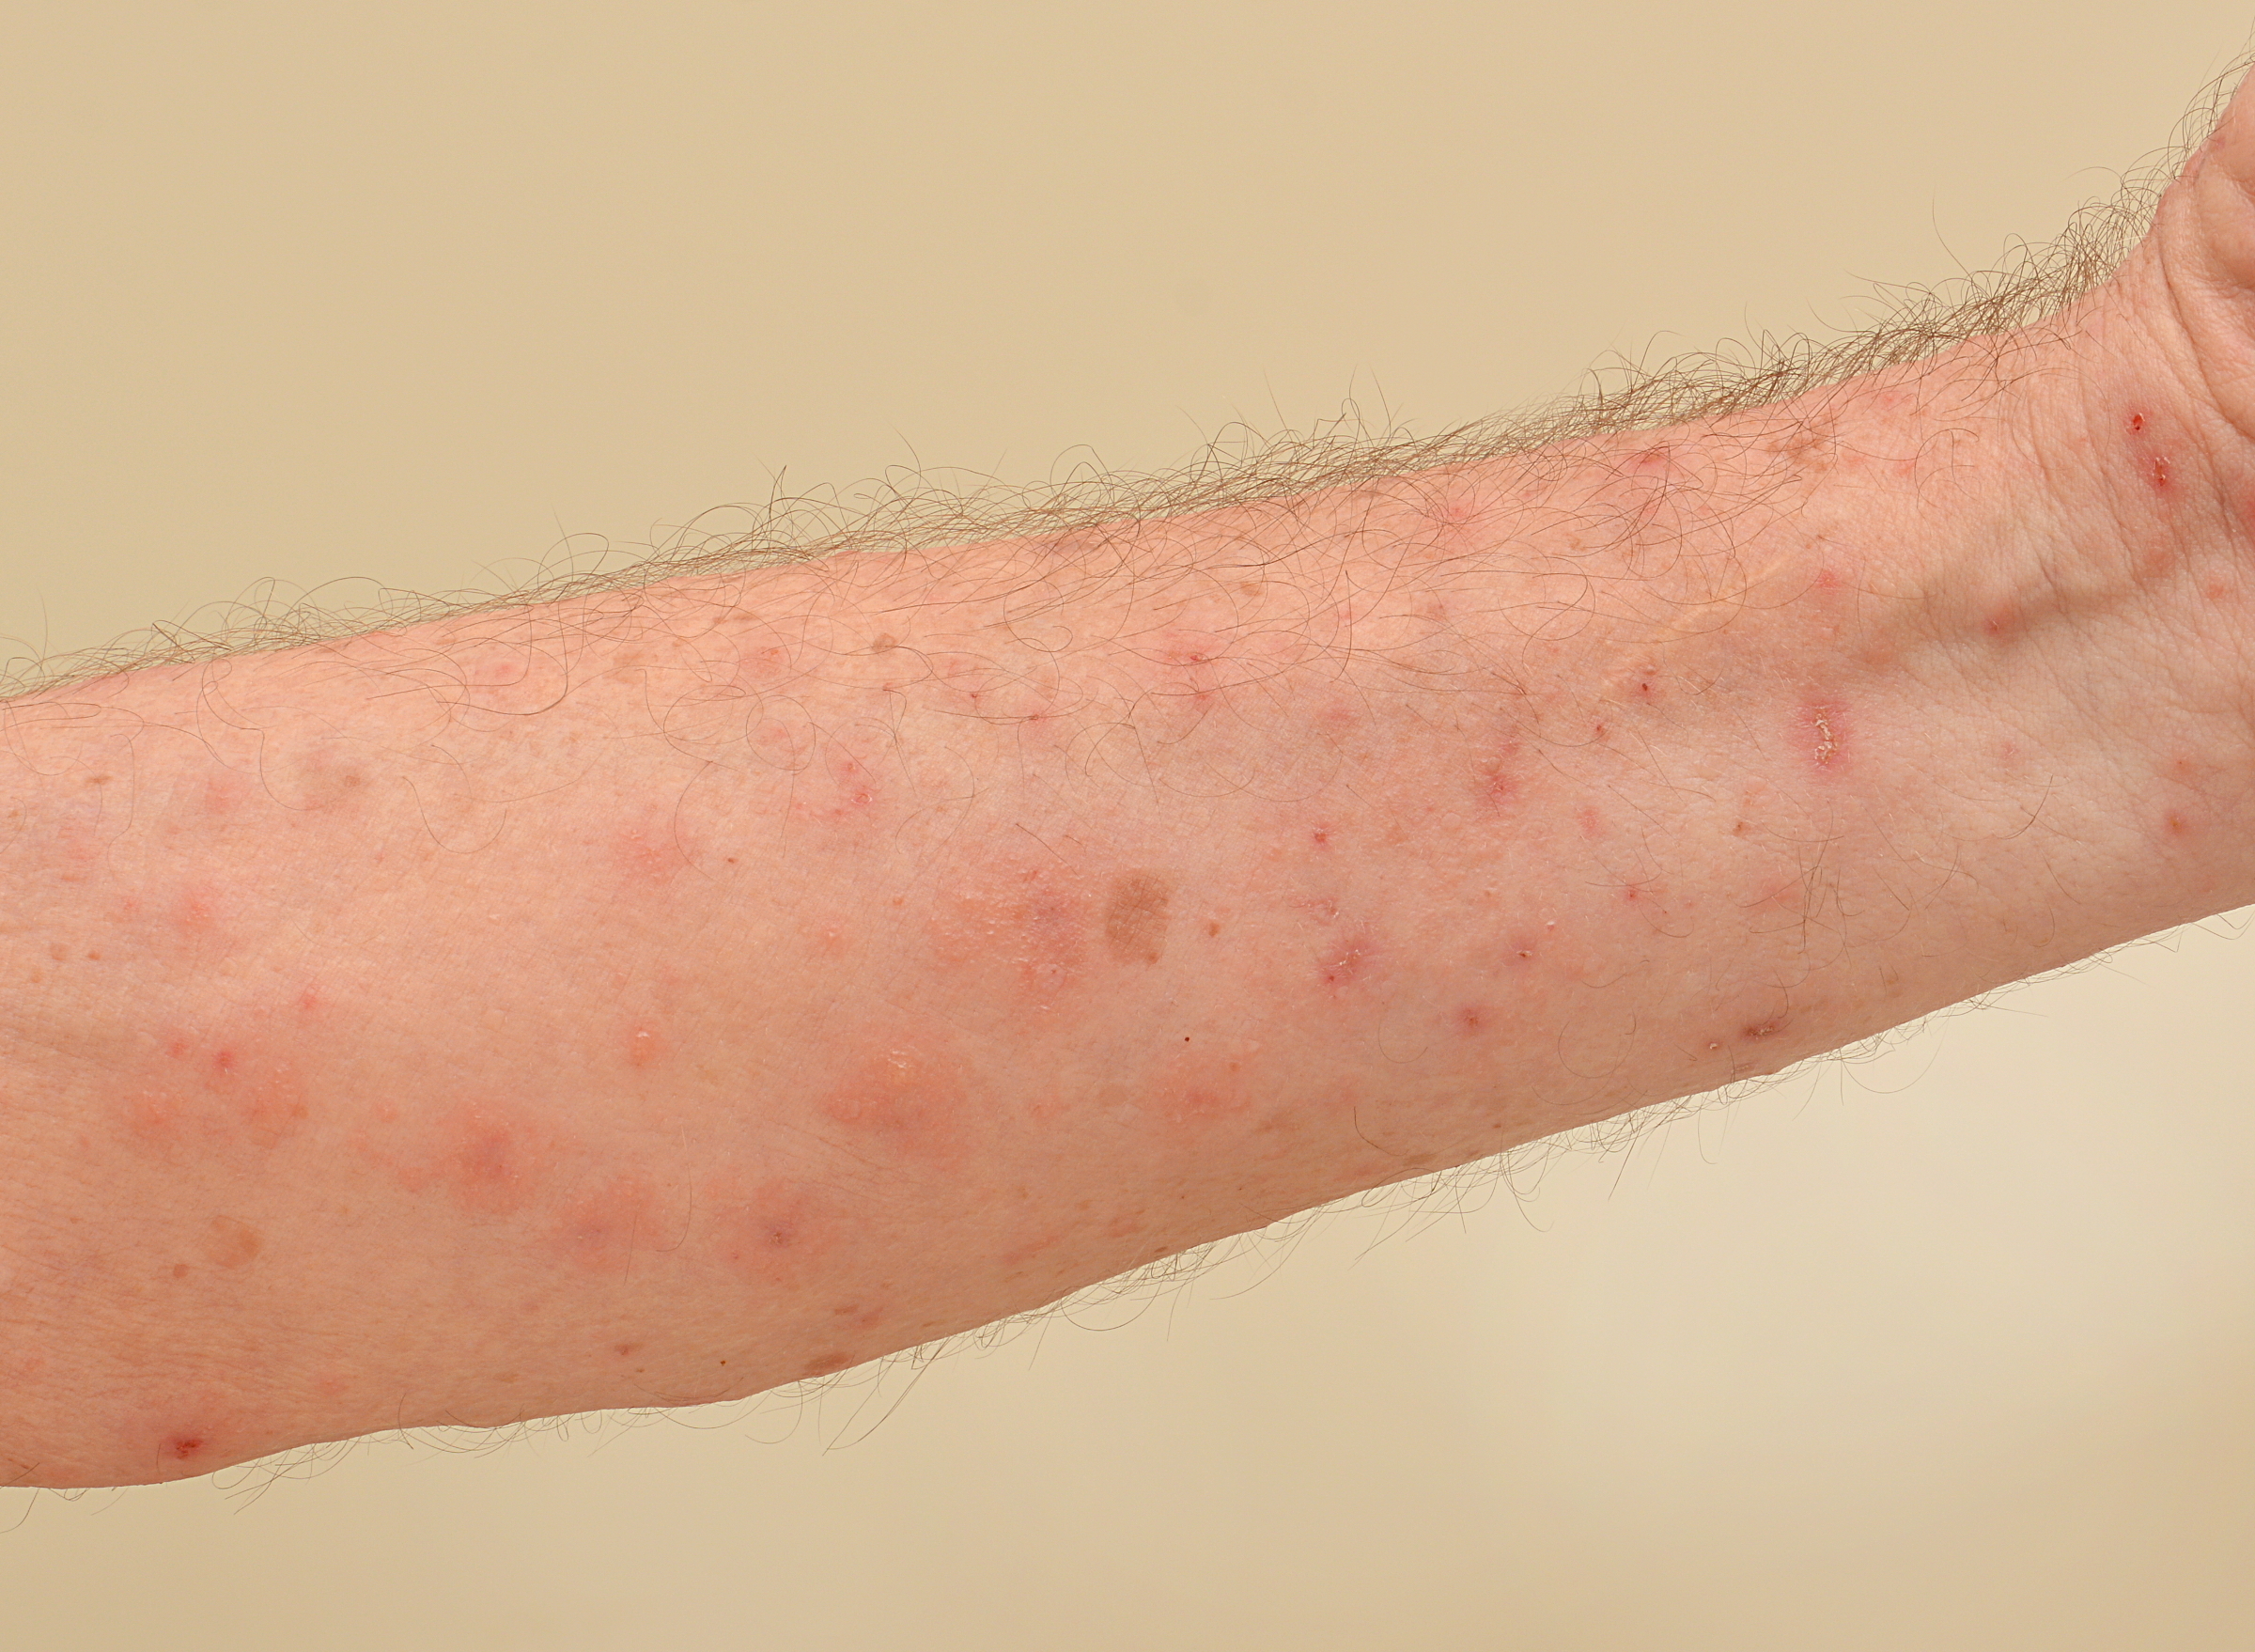 How Long Is Scabies Contagious?